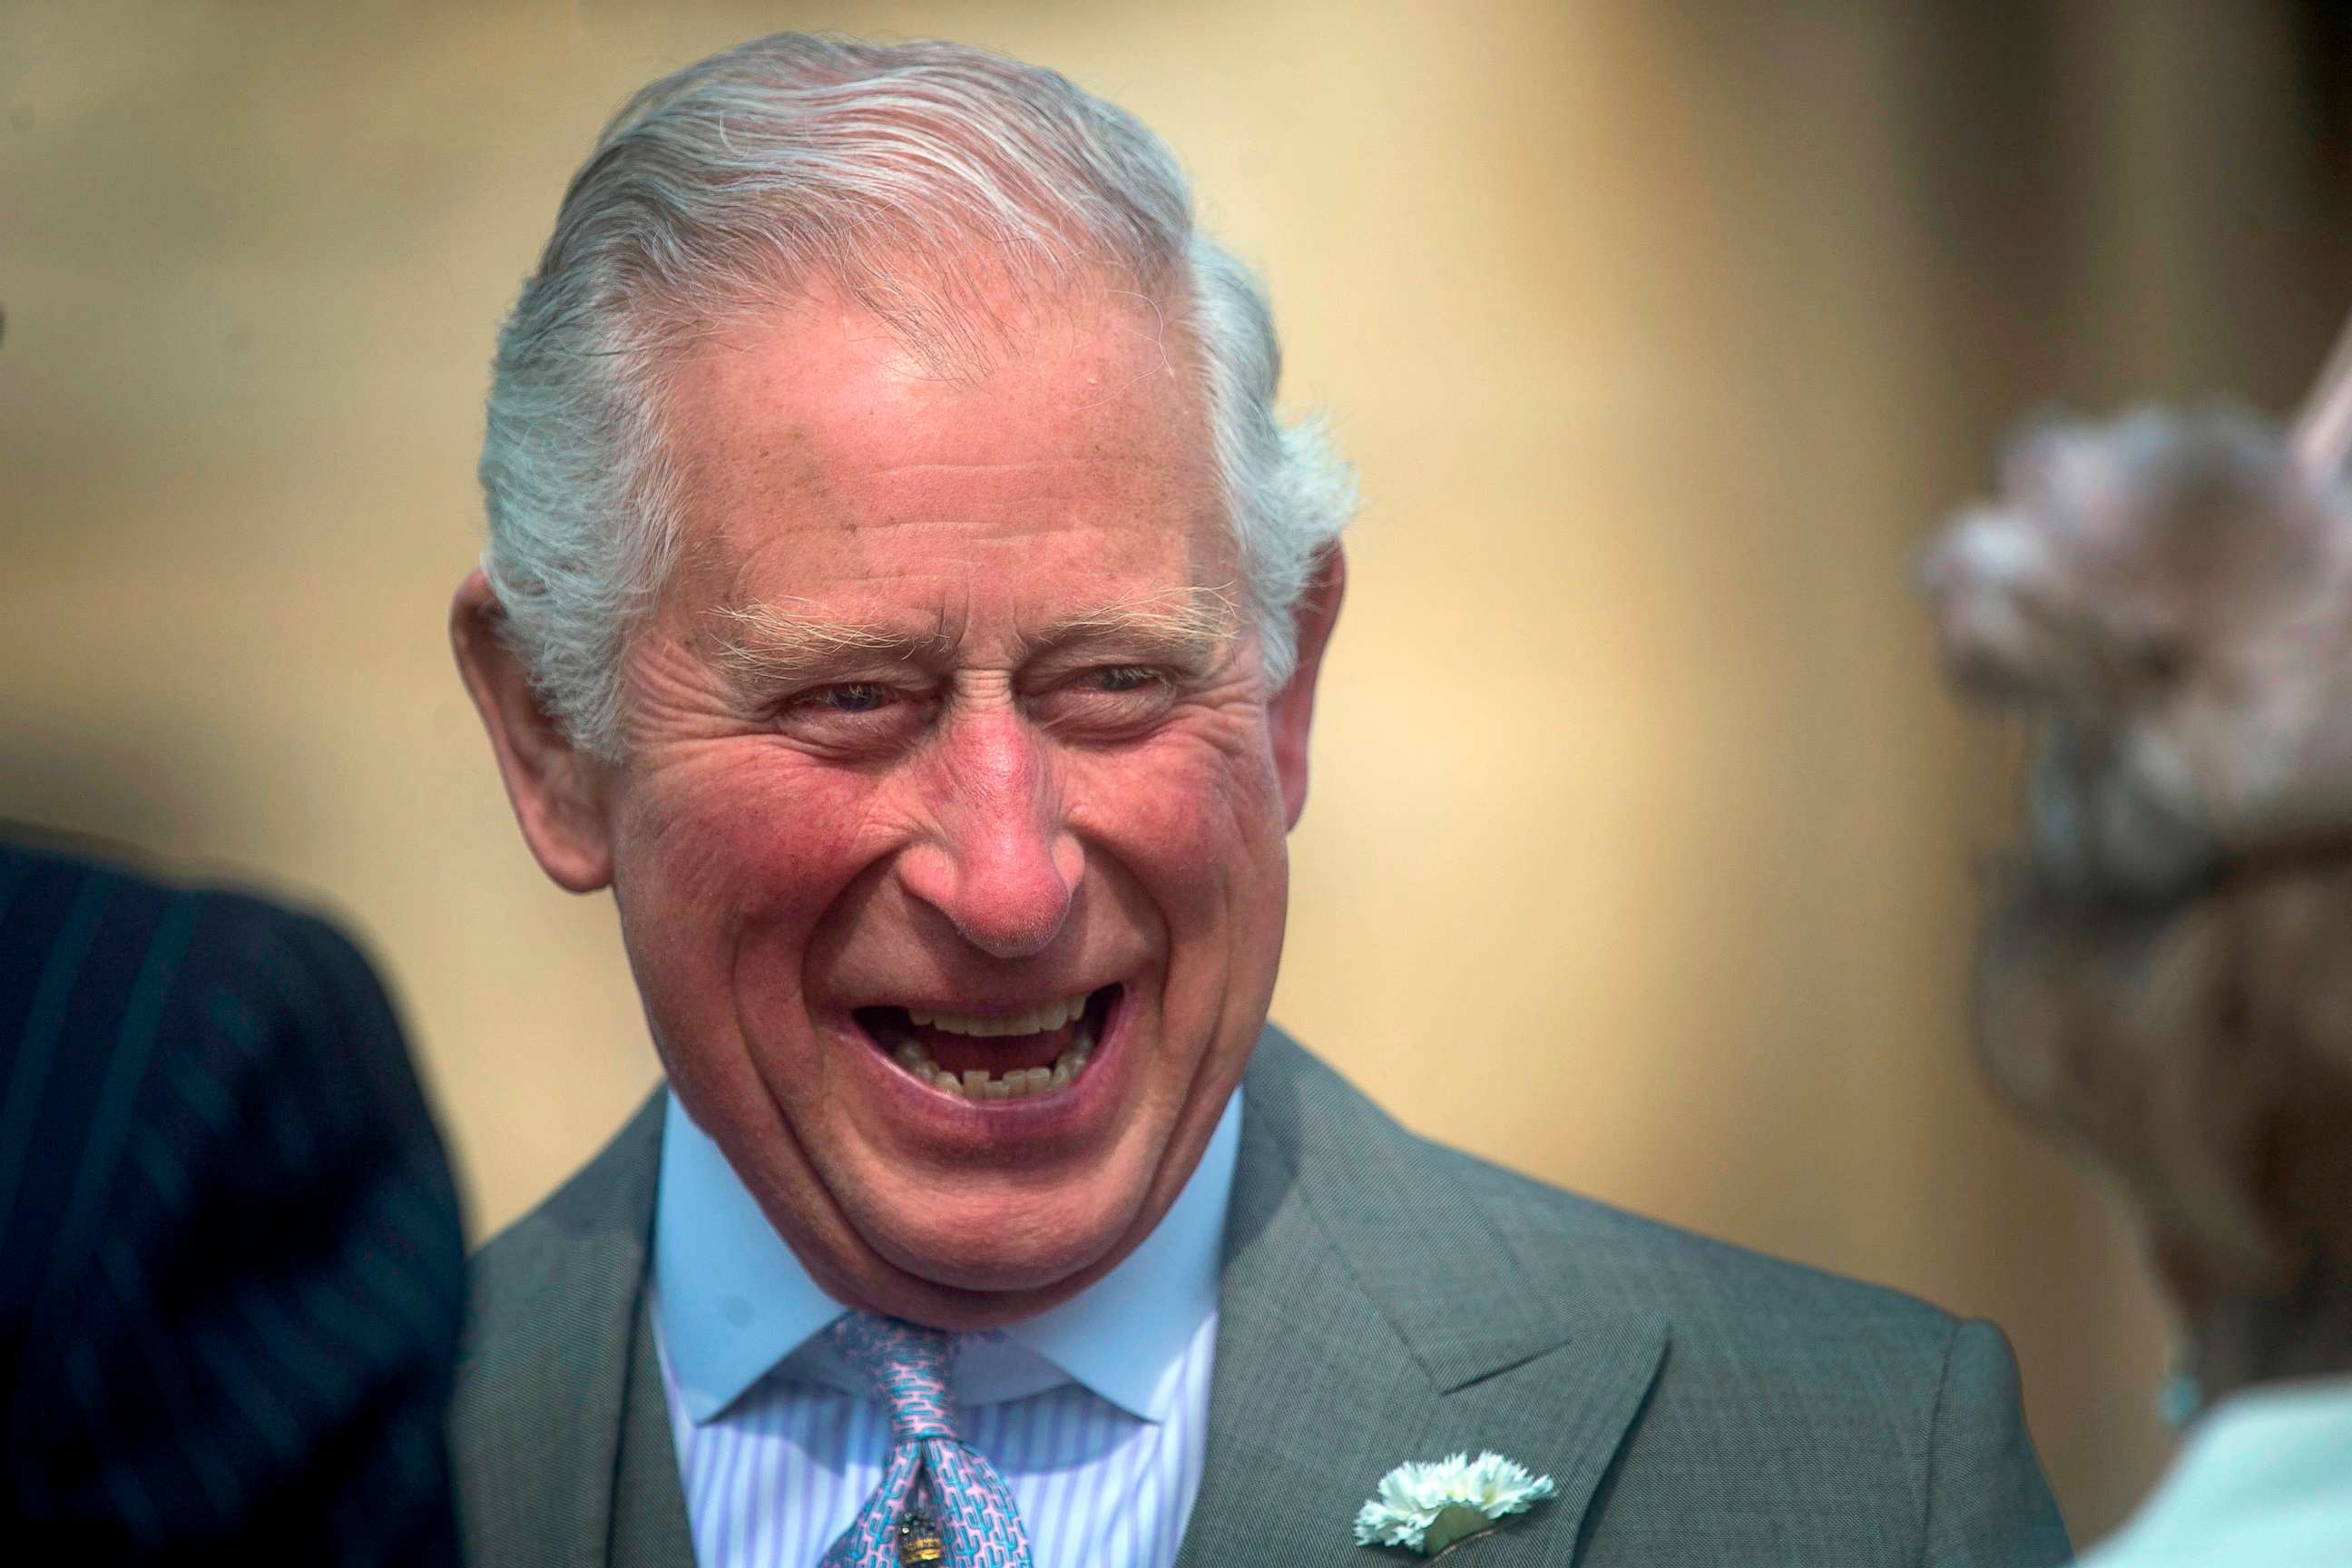 PHOTO: Britain's Prince Charles greets guests at the Queen's Garden Party at Buckingham Palace in central London on May 15, 2019.